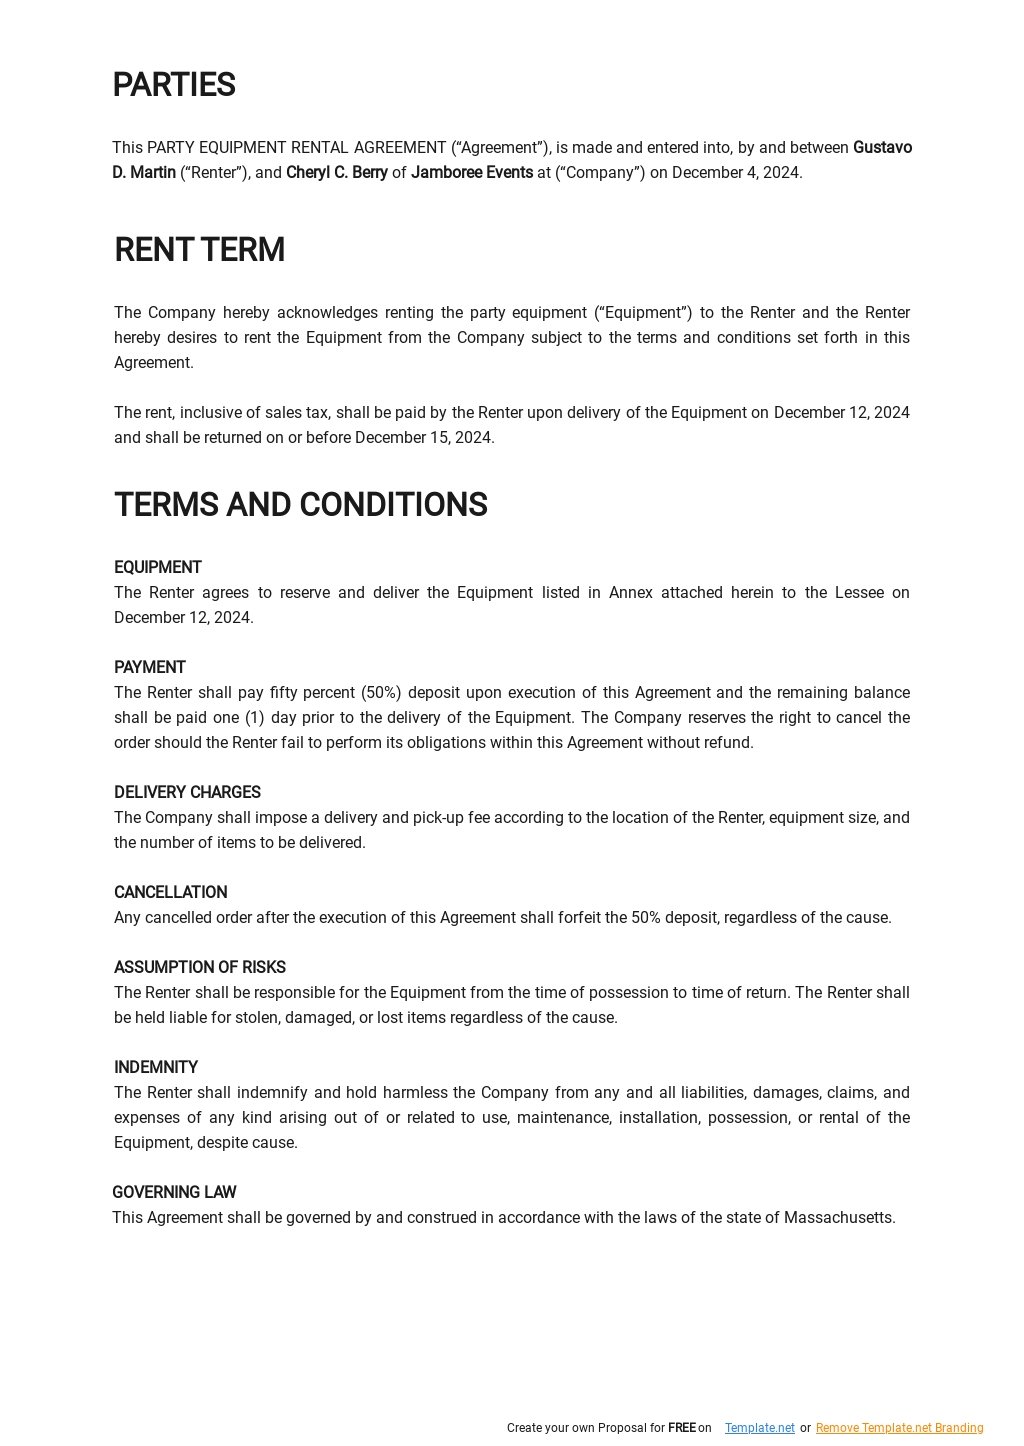 Party Equipment Rental Agreement Template in Google Docs, Word